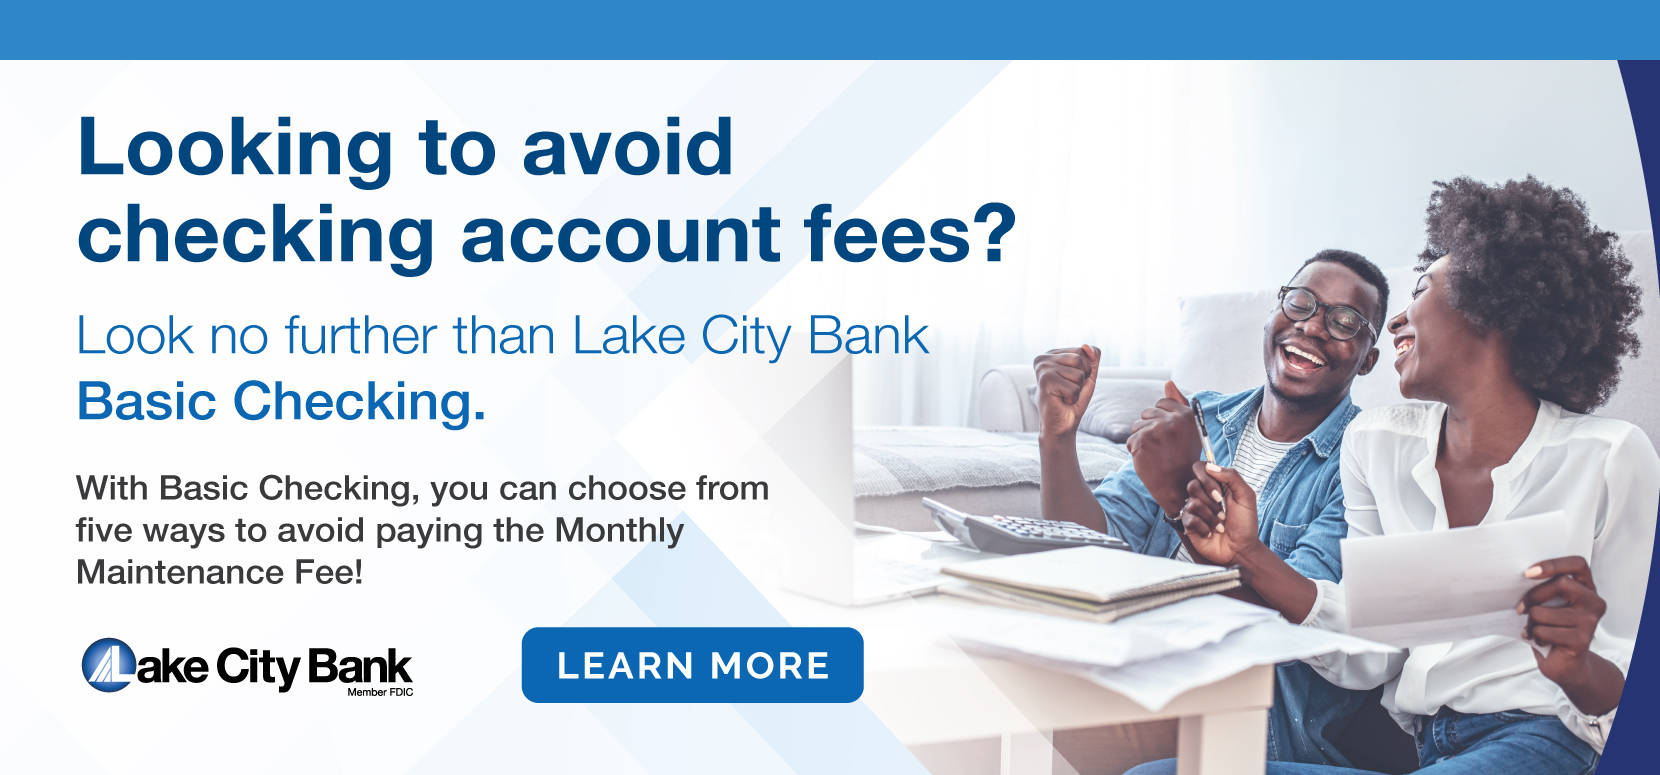 Basic Checking Choose from 5 ways to avoid monthly fee. Learn More